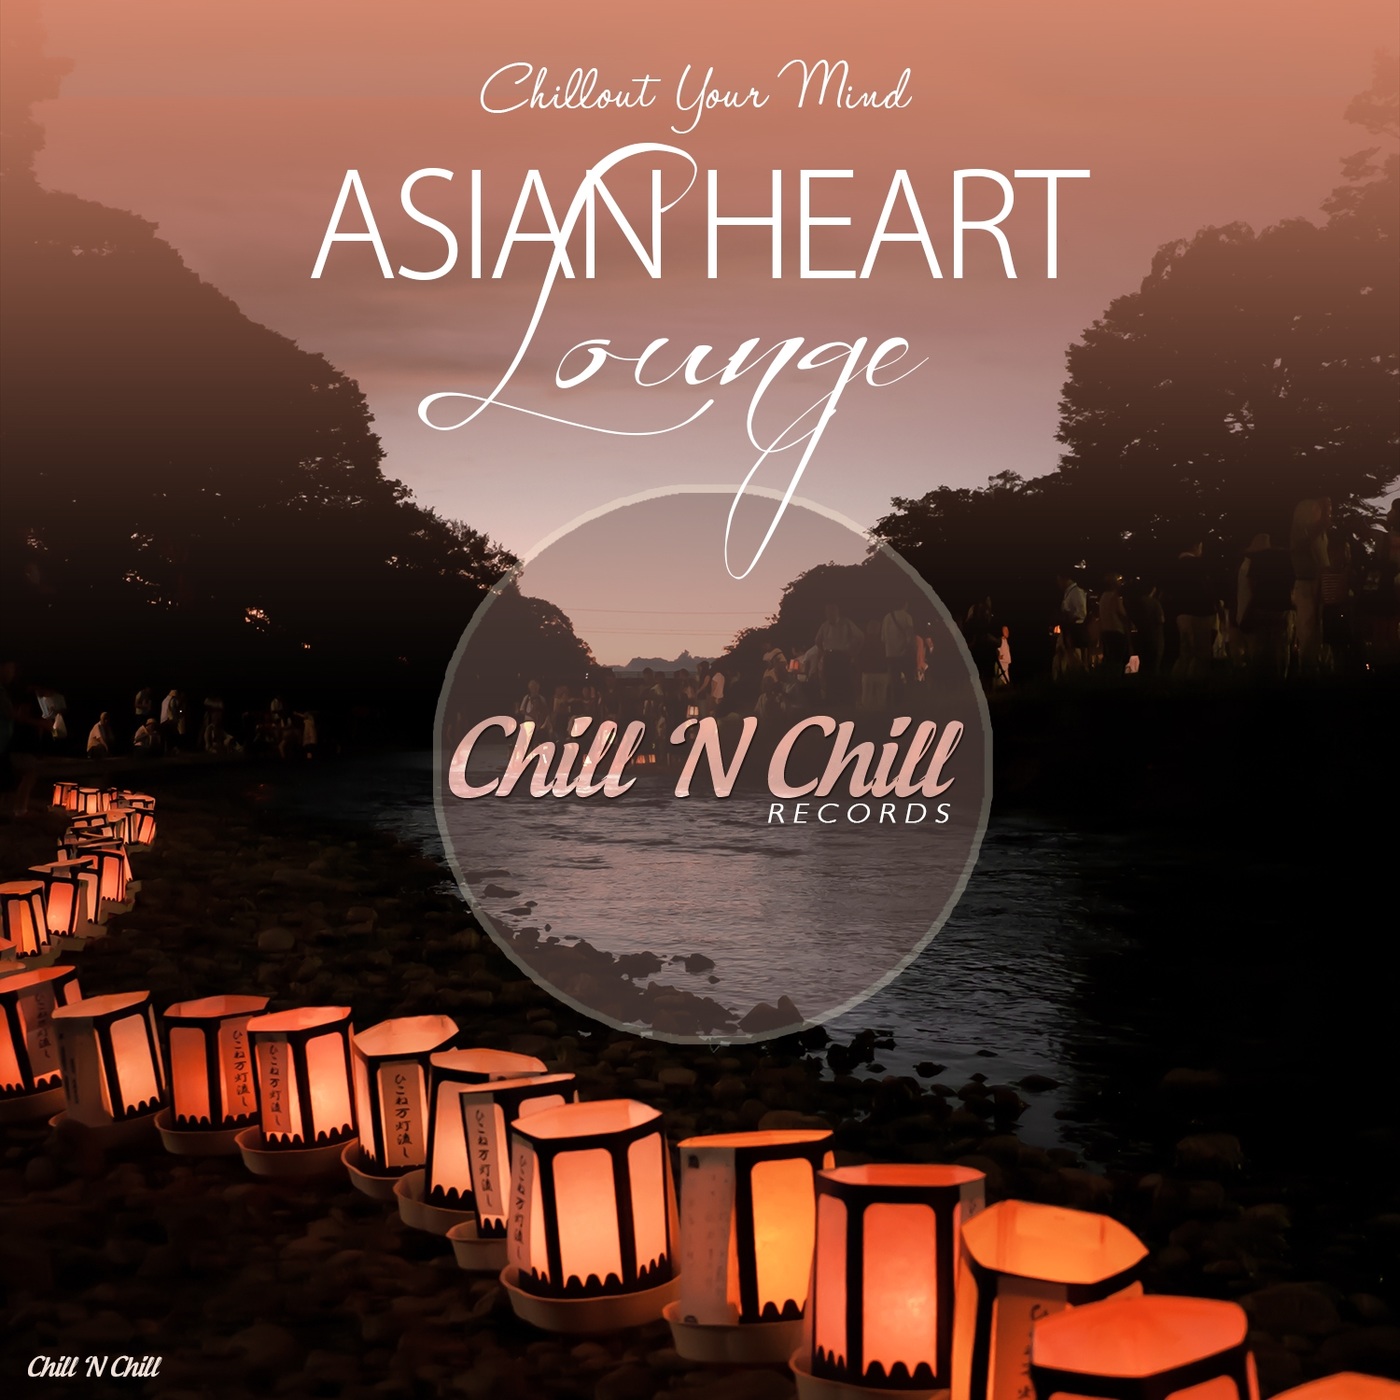 chill n chill records《asian heart lounge：chillout your mind》cd